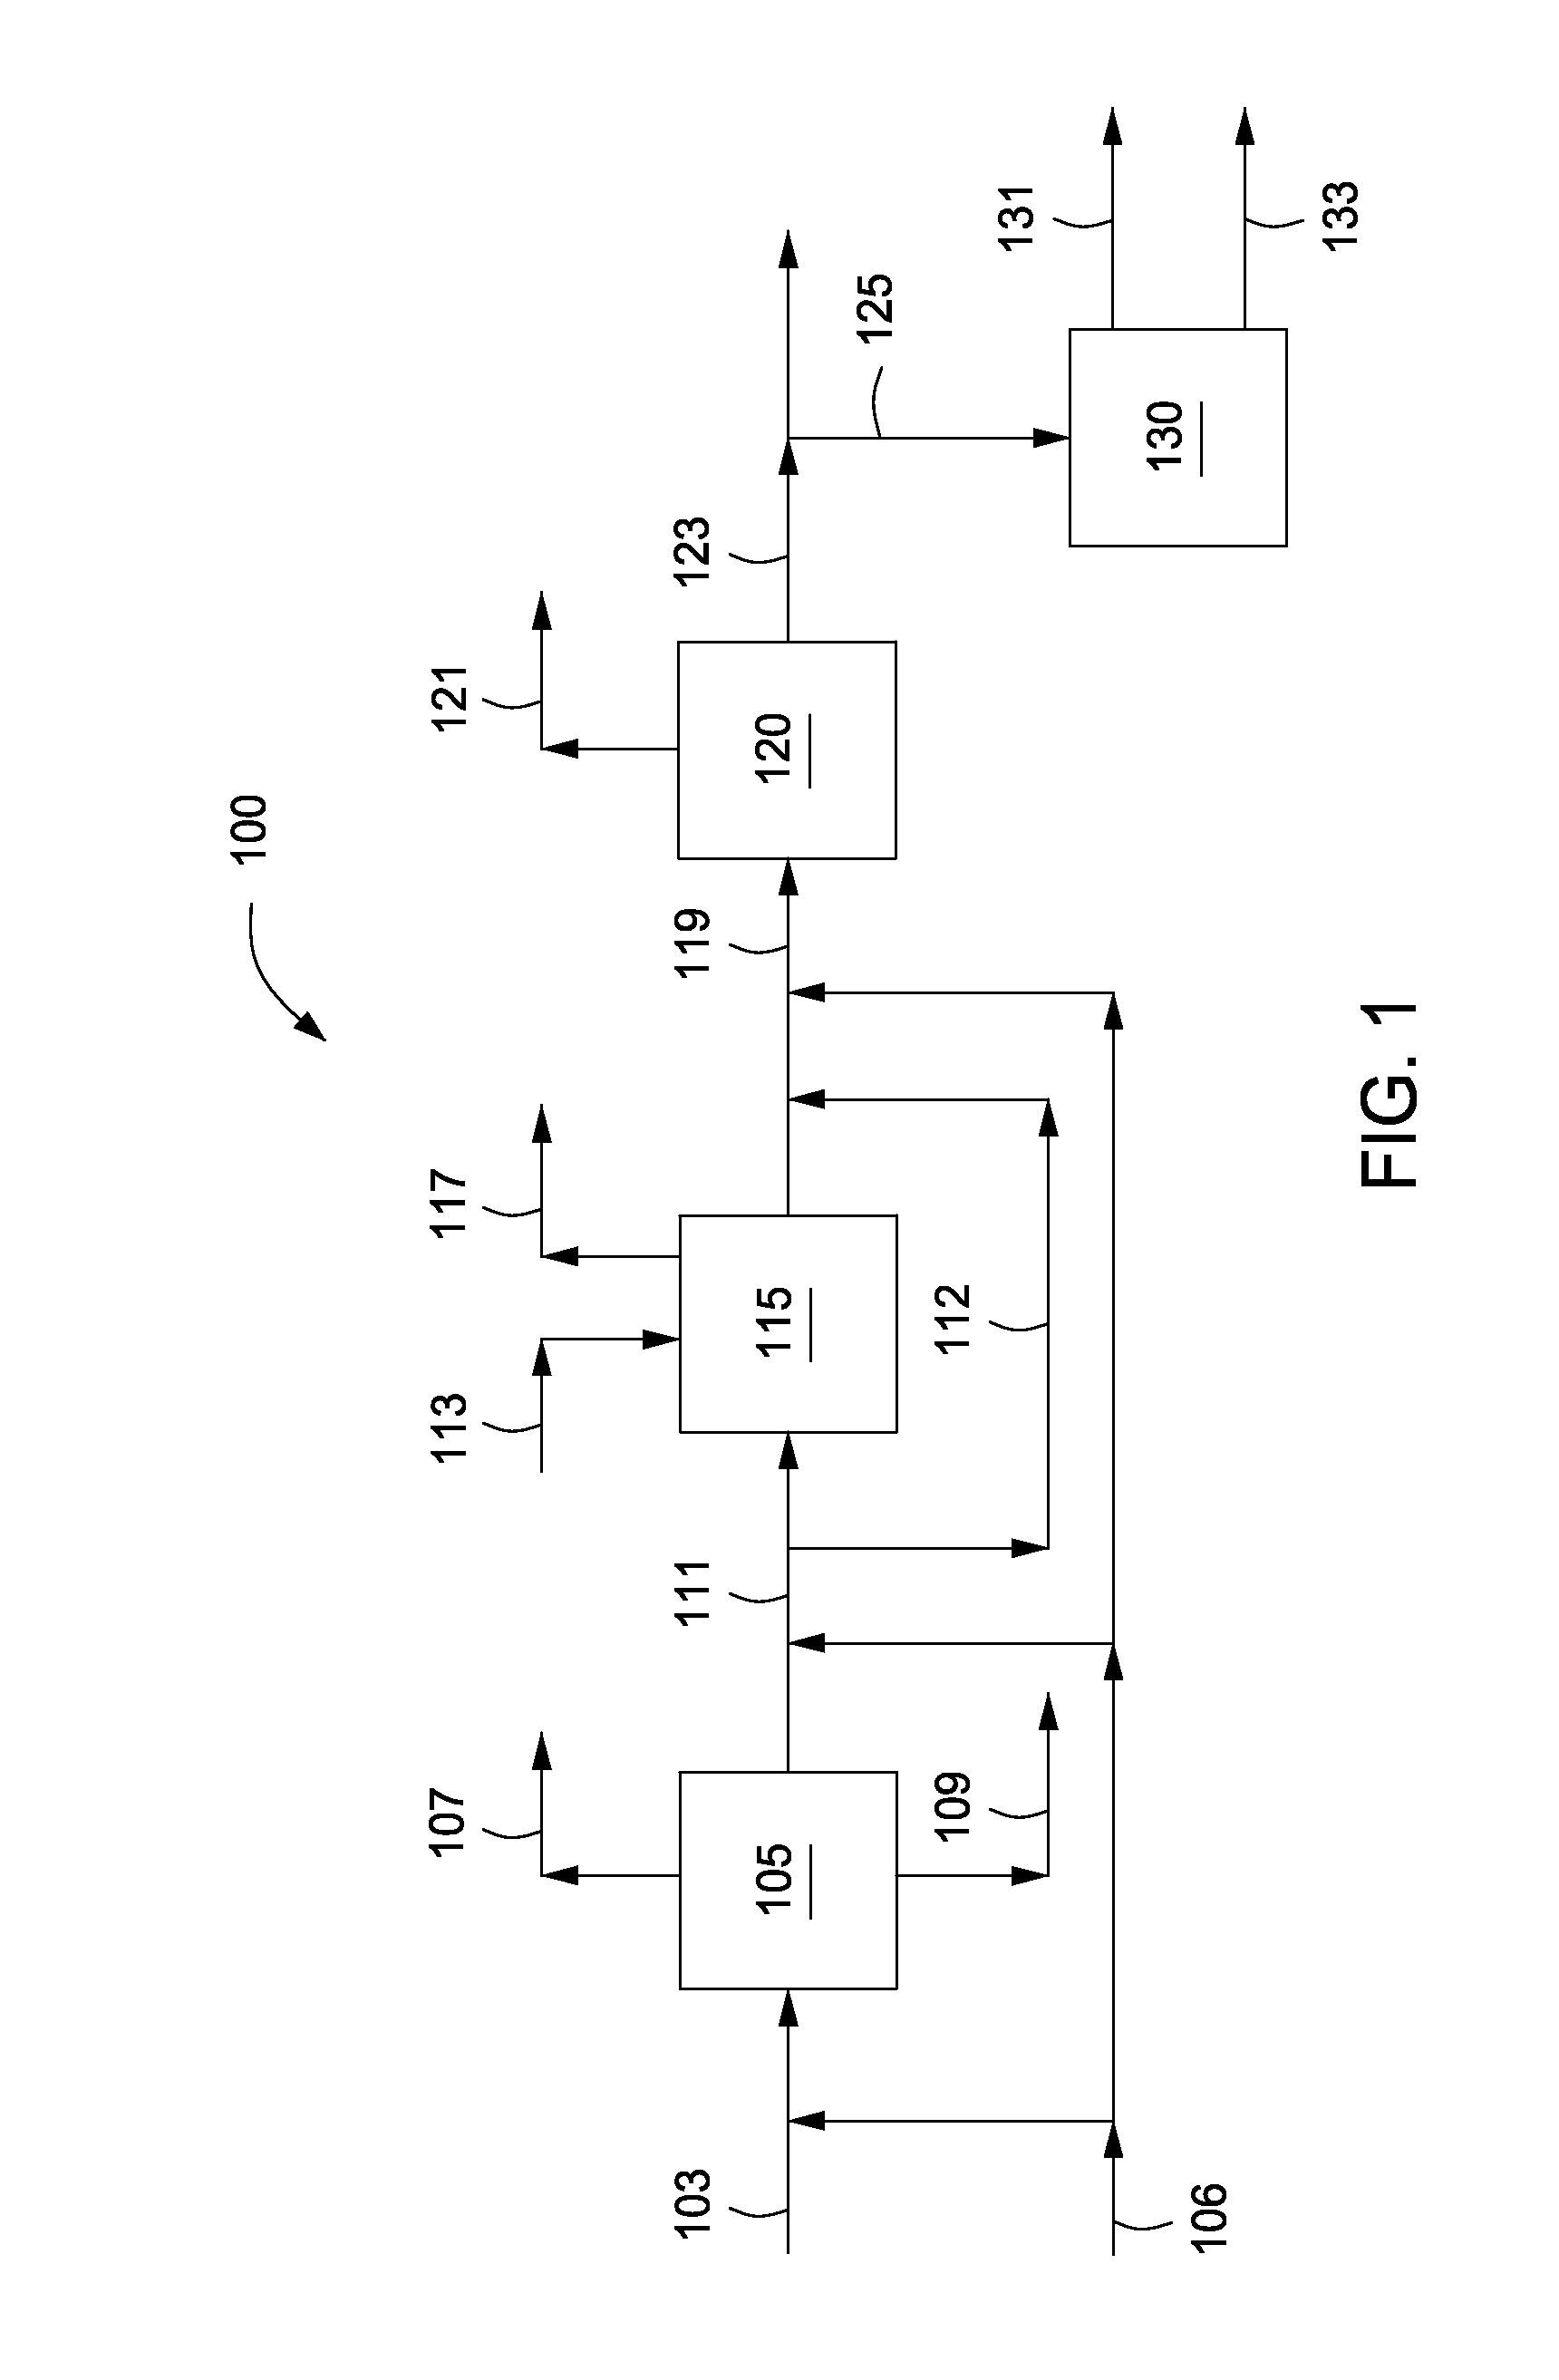 Systems and Methods for Producing N-Paraffins From Low Value Feedstocks